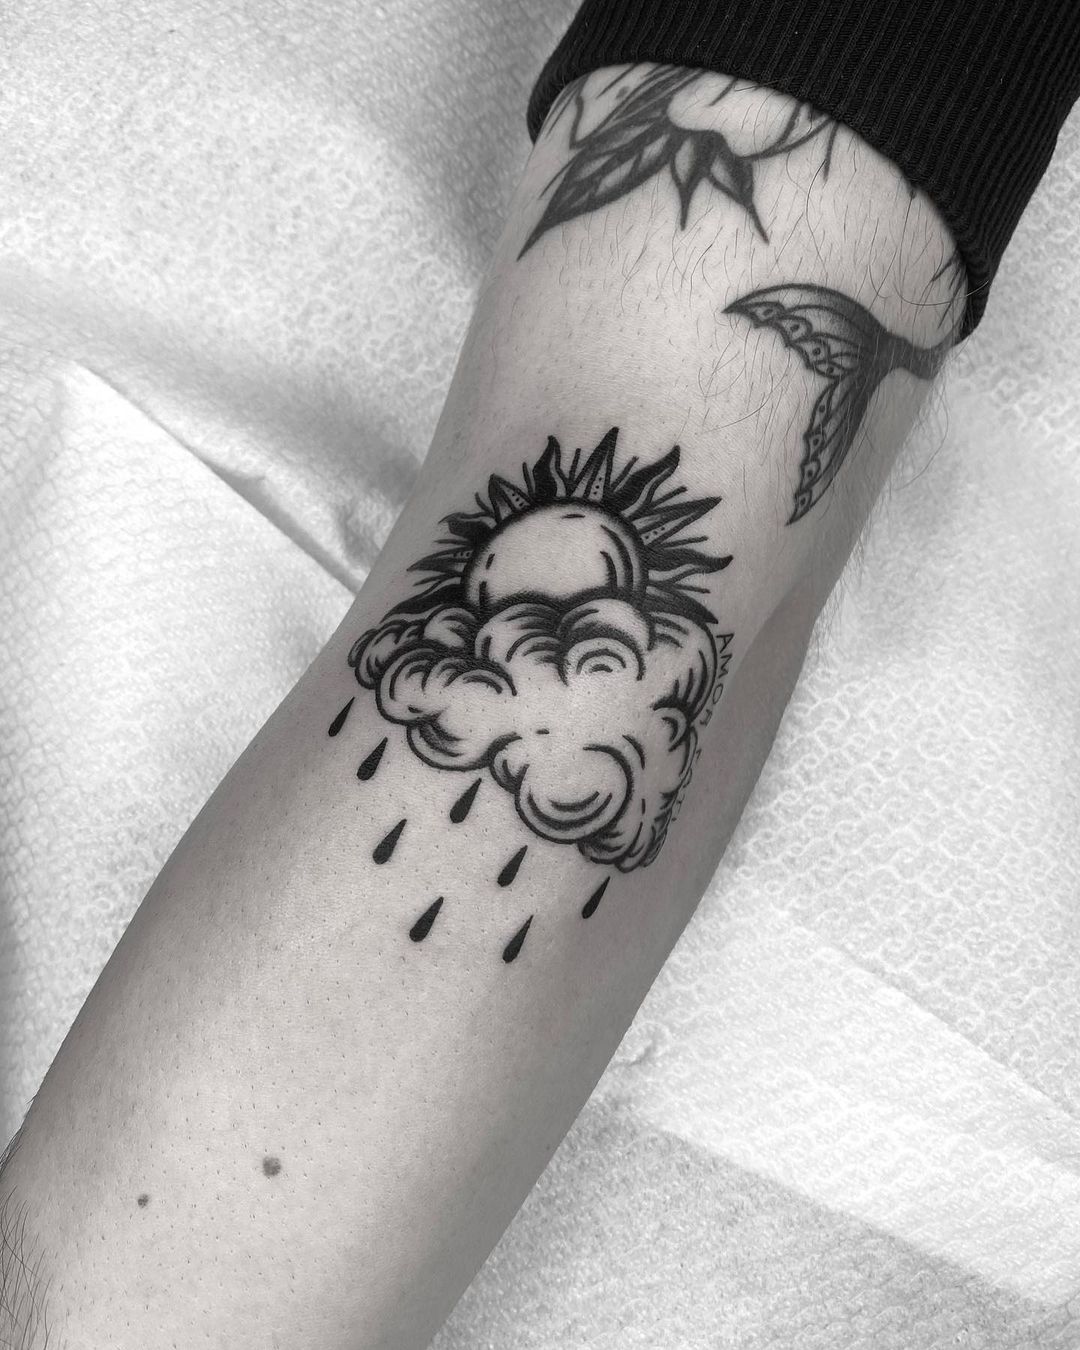 Black and grey inked cloud tattoo design by cosmoink